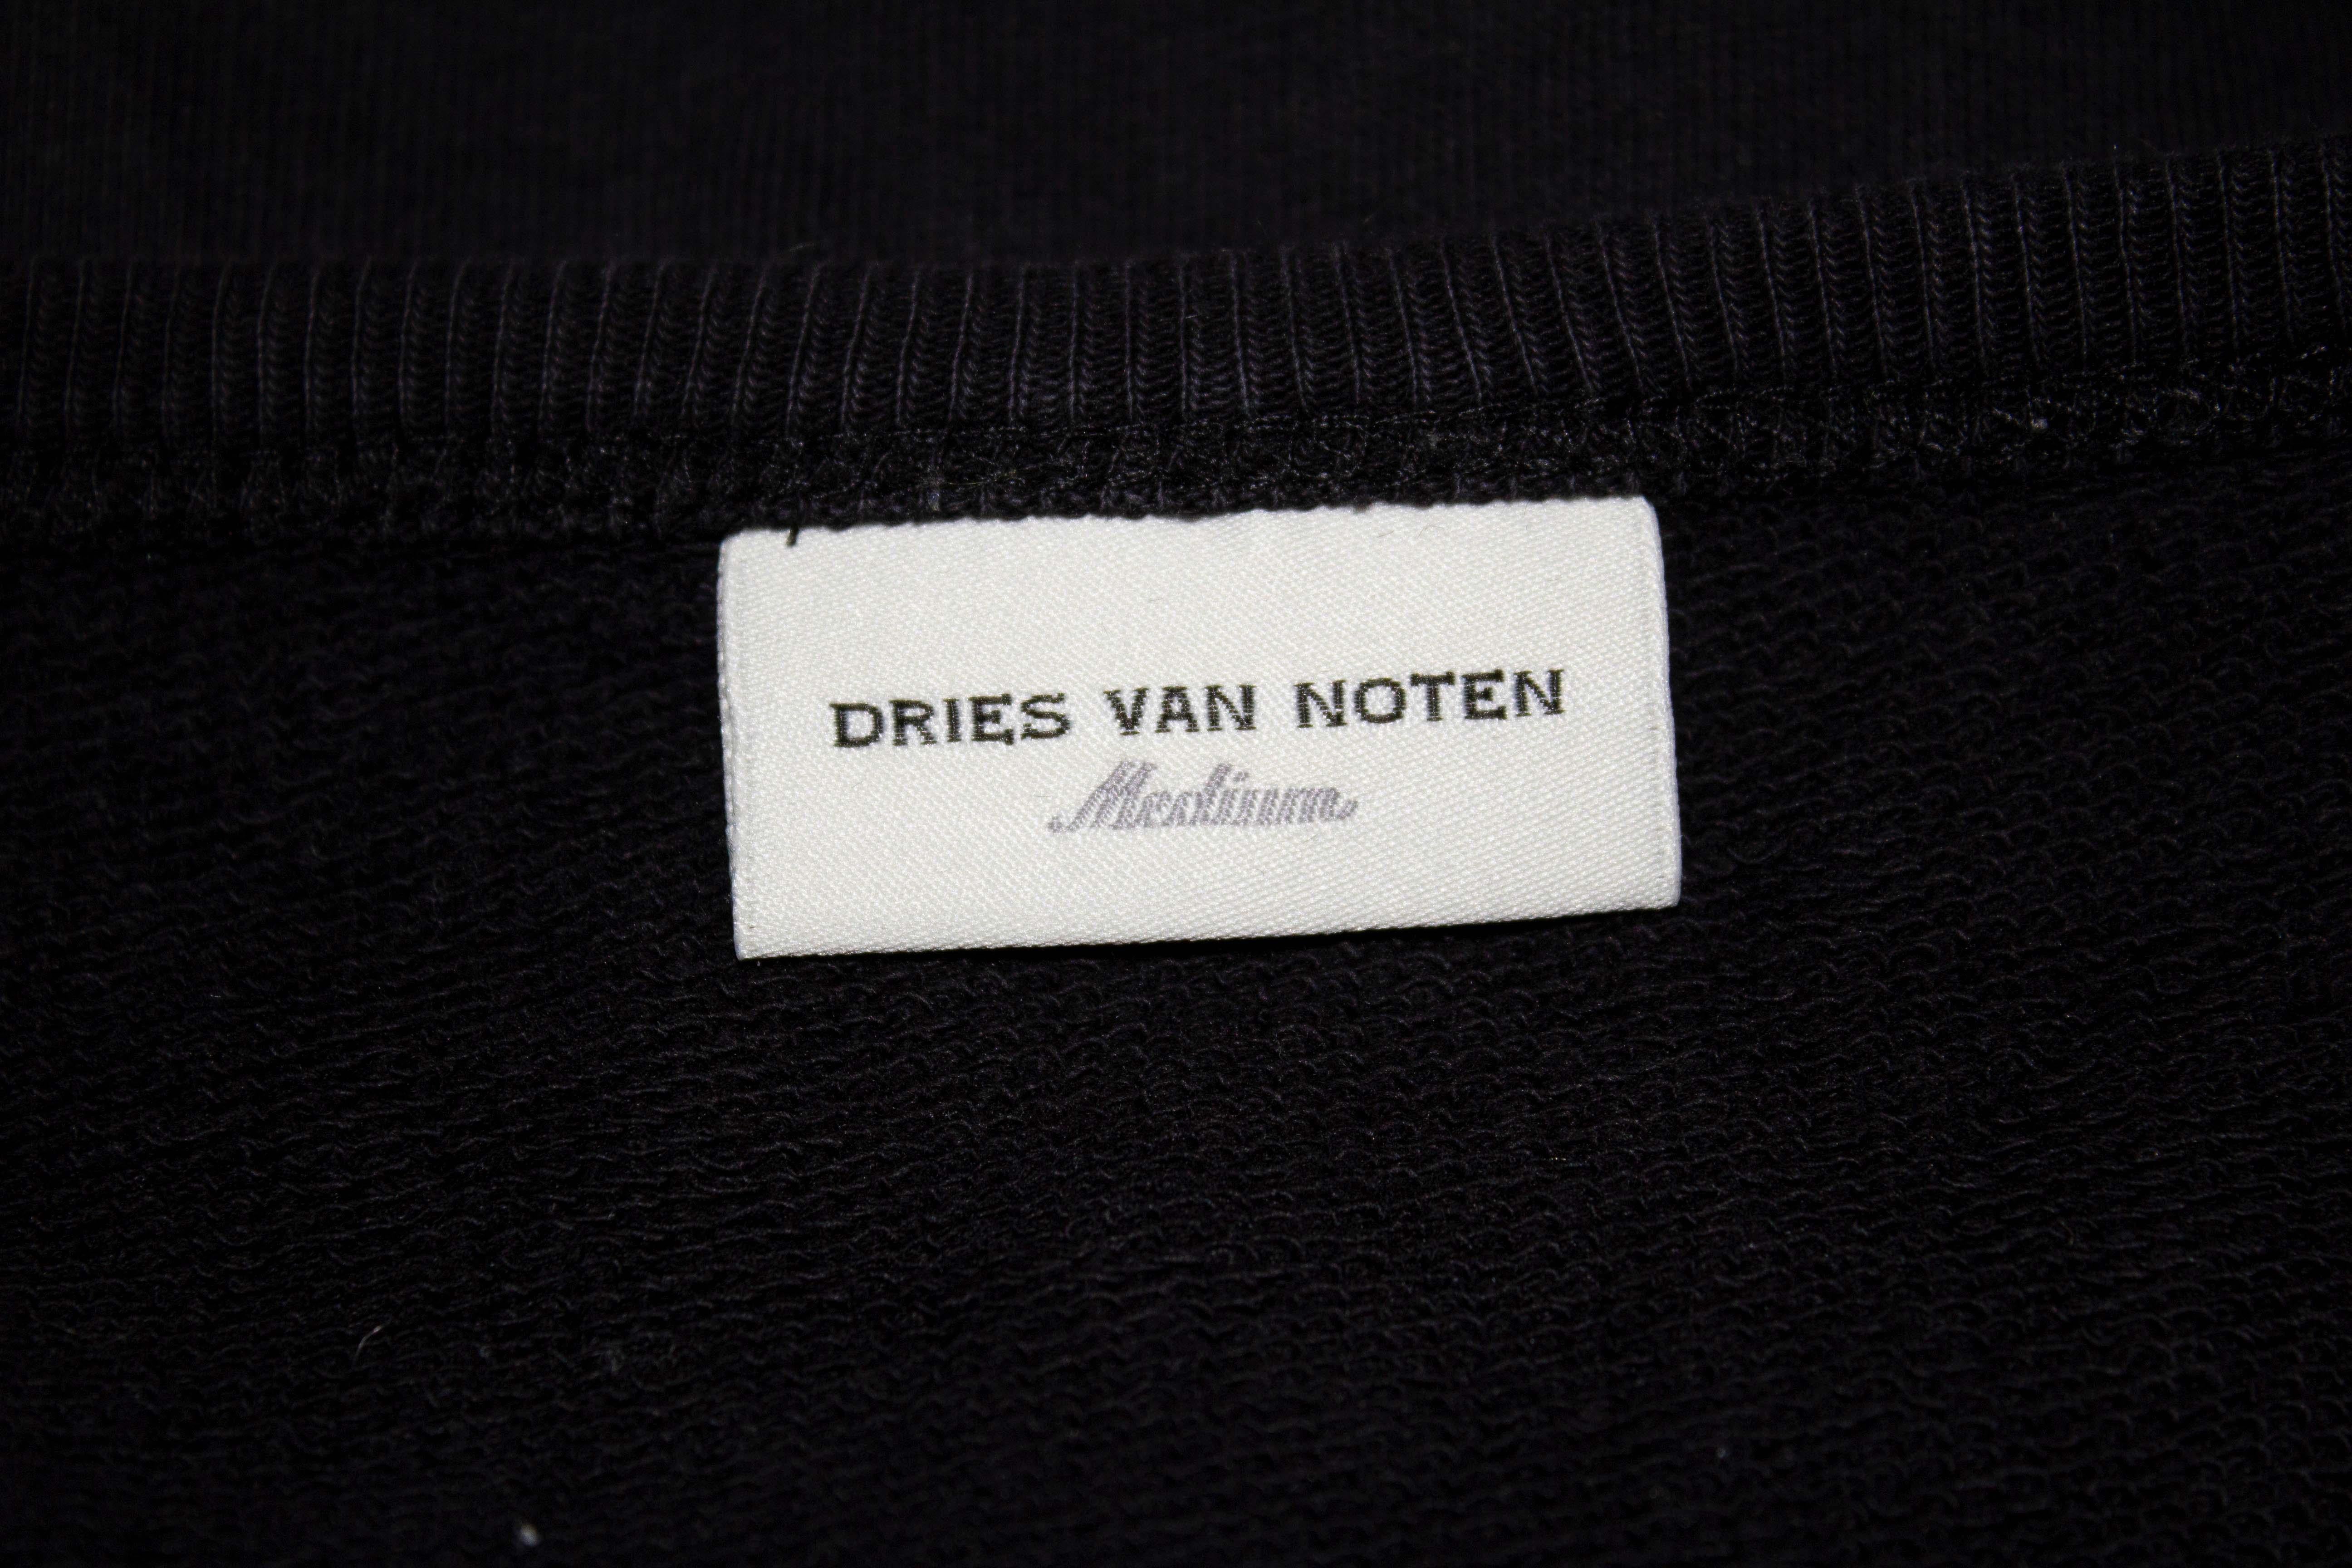 A chic and easy to wear black sweat top with white trim by  Dries van Noten. The black top has a round neckline, zip on the left hand side and white trim. 
Measurements: Bust up to 42'', length 27''.